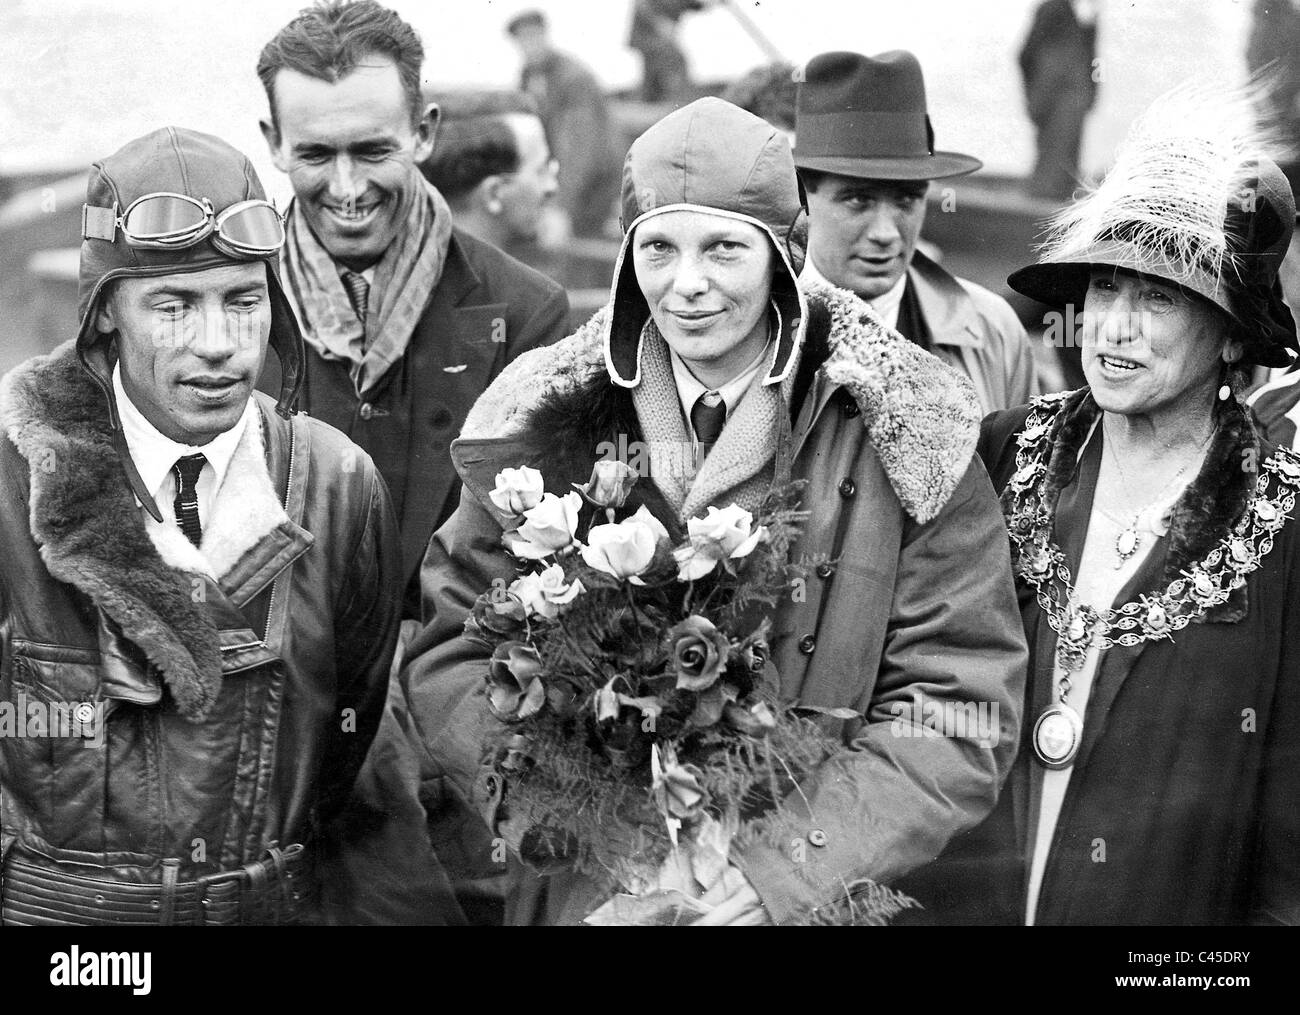 Image result for amelia earhart with Wilmer Stultz and Louis Gordon.1928